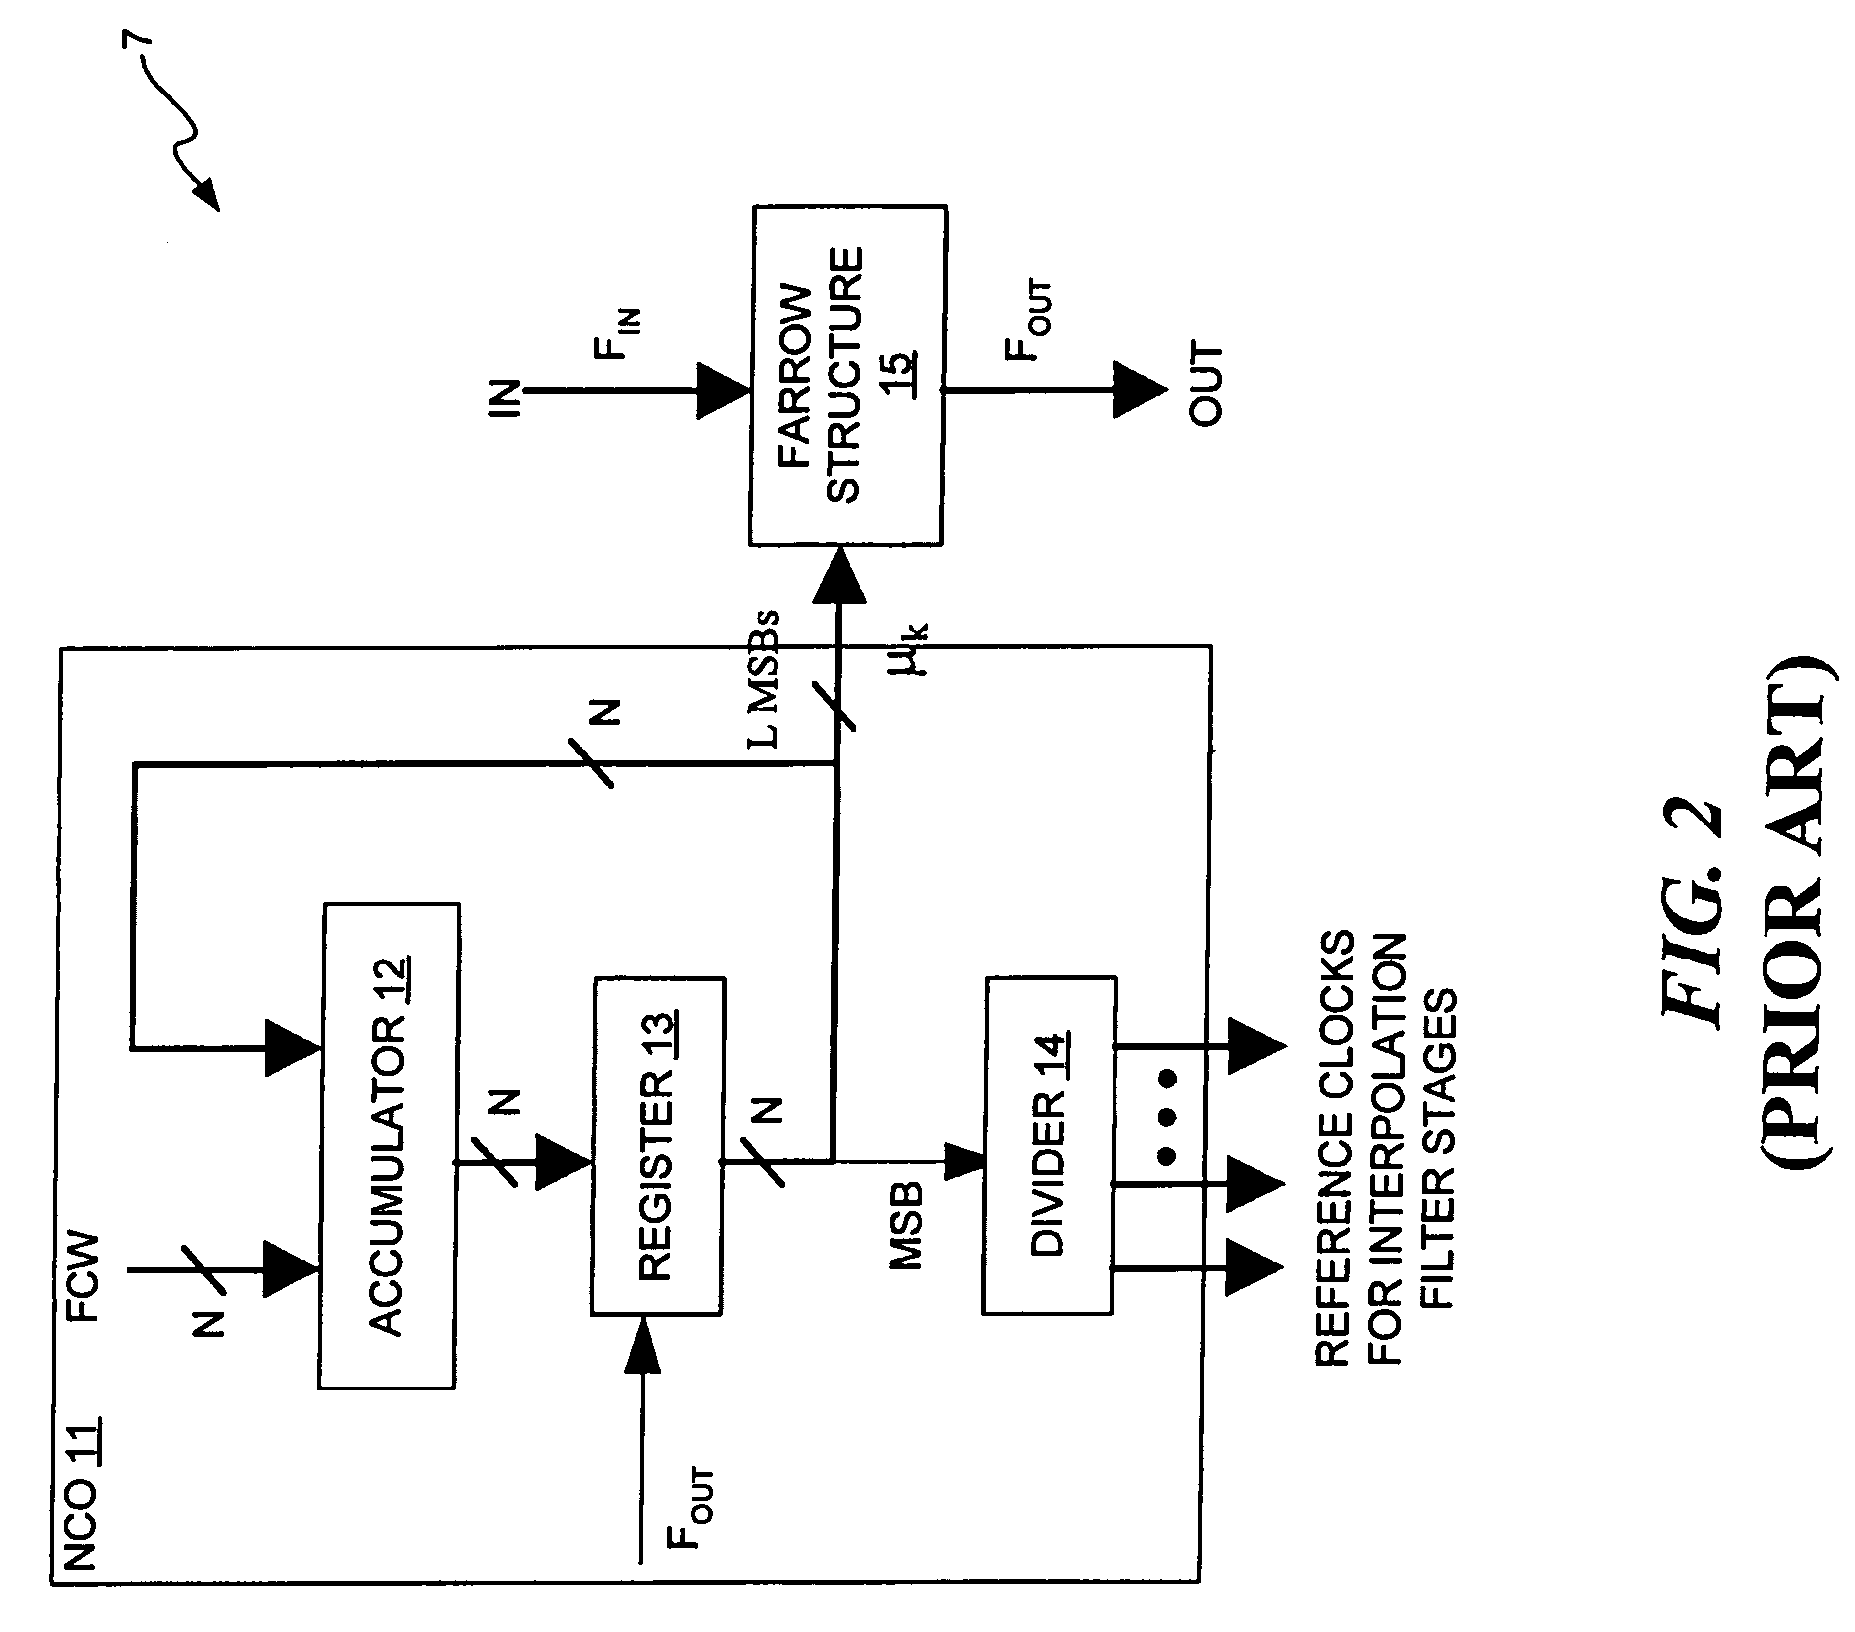 Method and apparatus for performing sample rate conversion